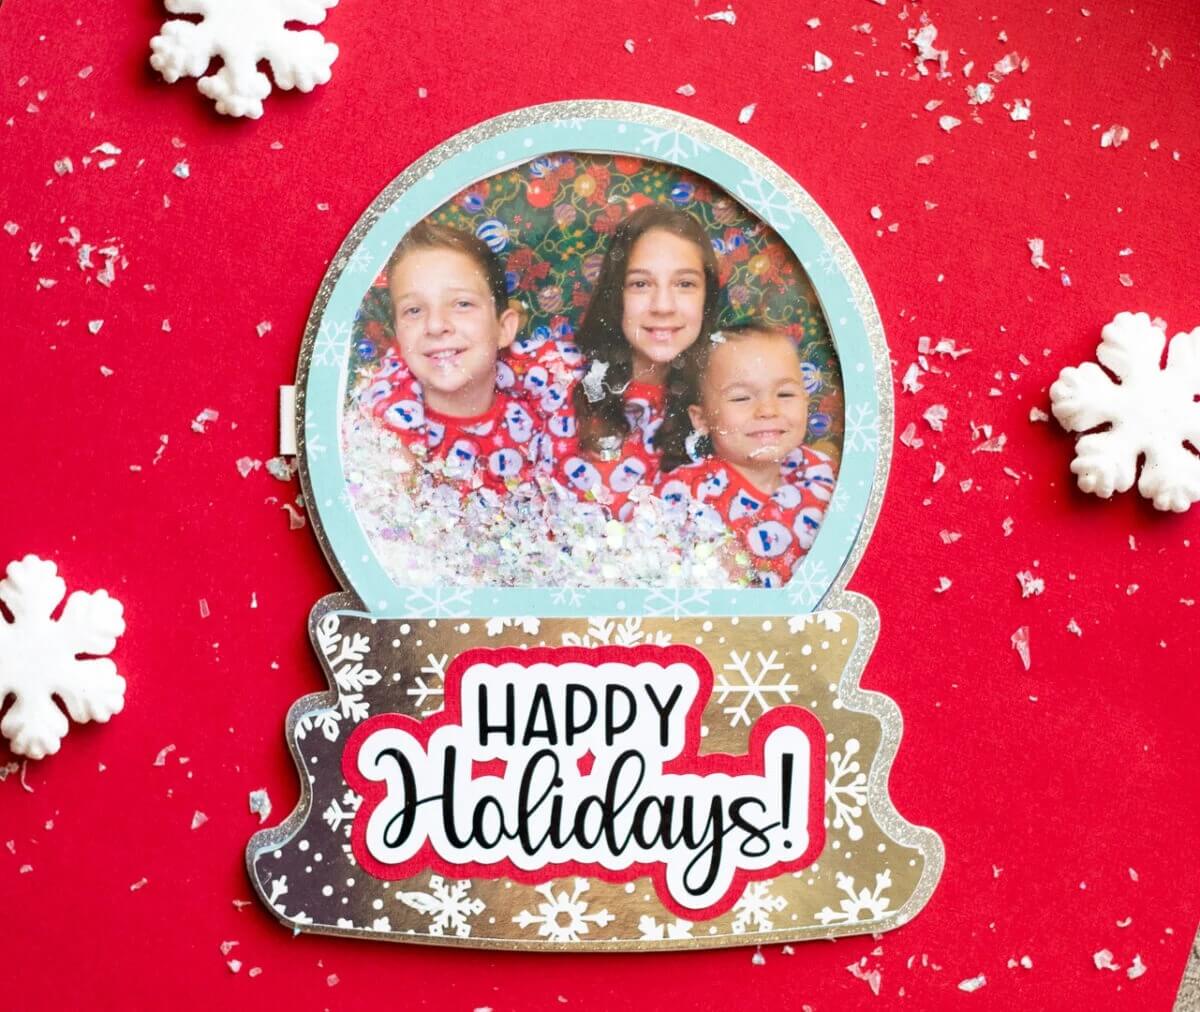 Shaker Snow Globe Christmas Card Project With Cricut Machine Free Cricut Projects With Cardstock